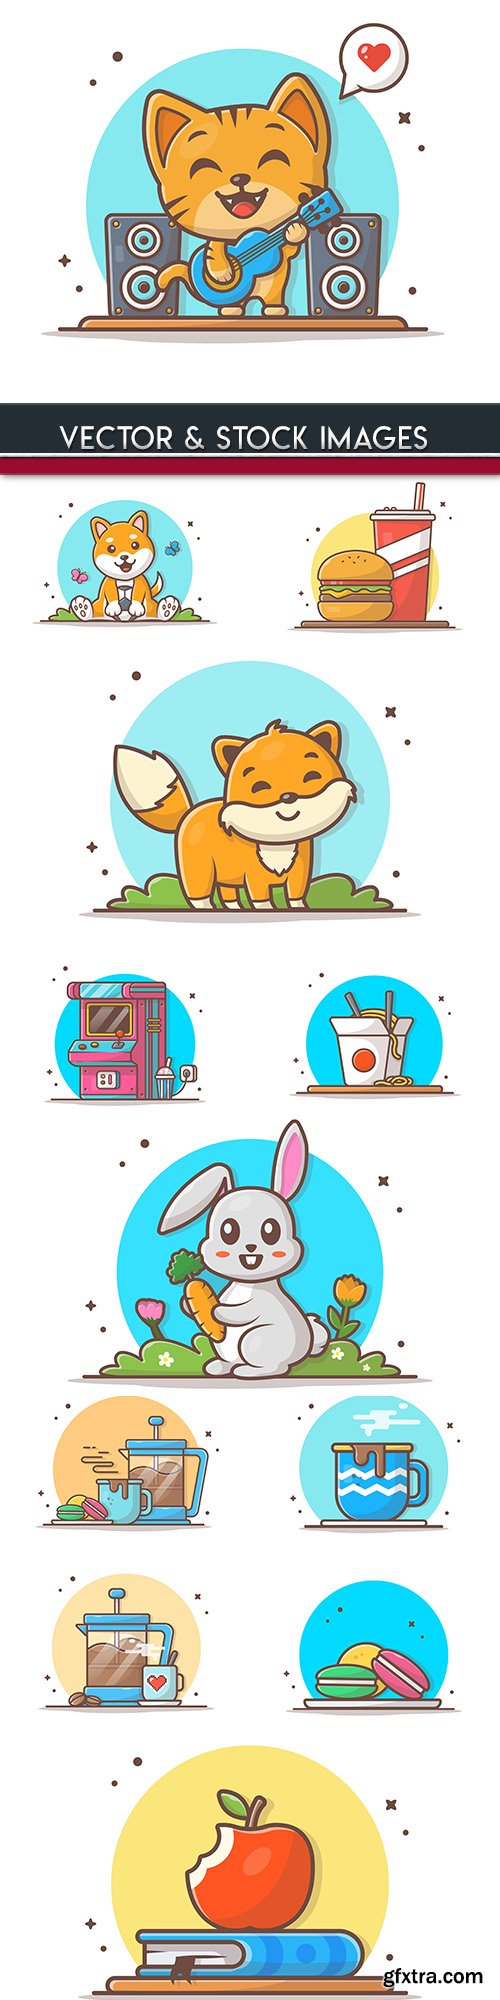 Funny animals icon illustration and badges 